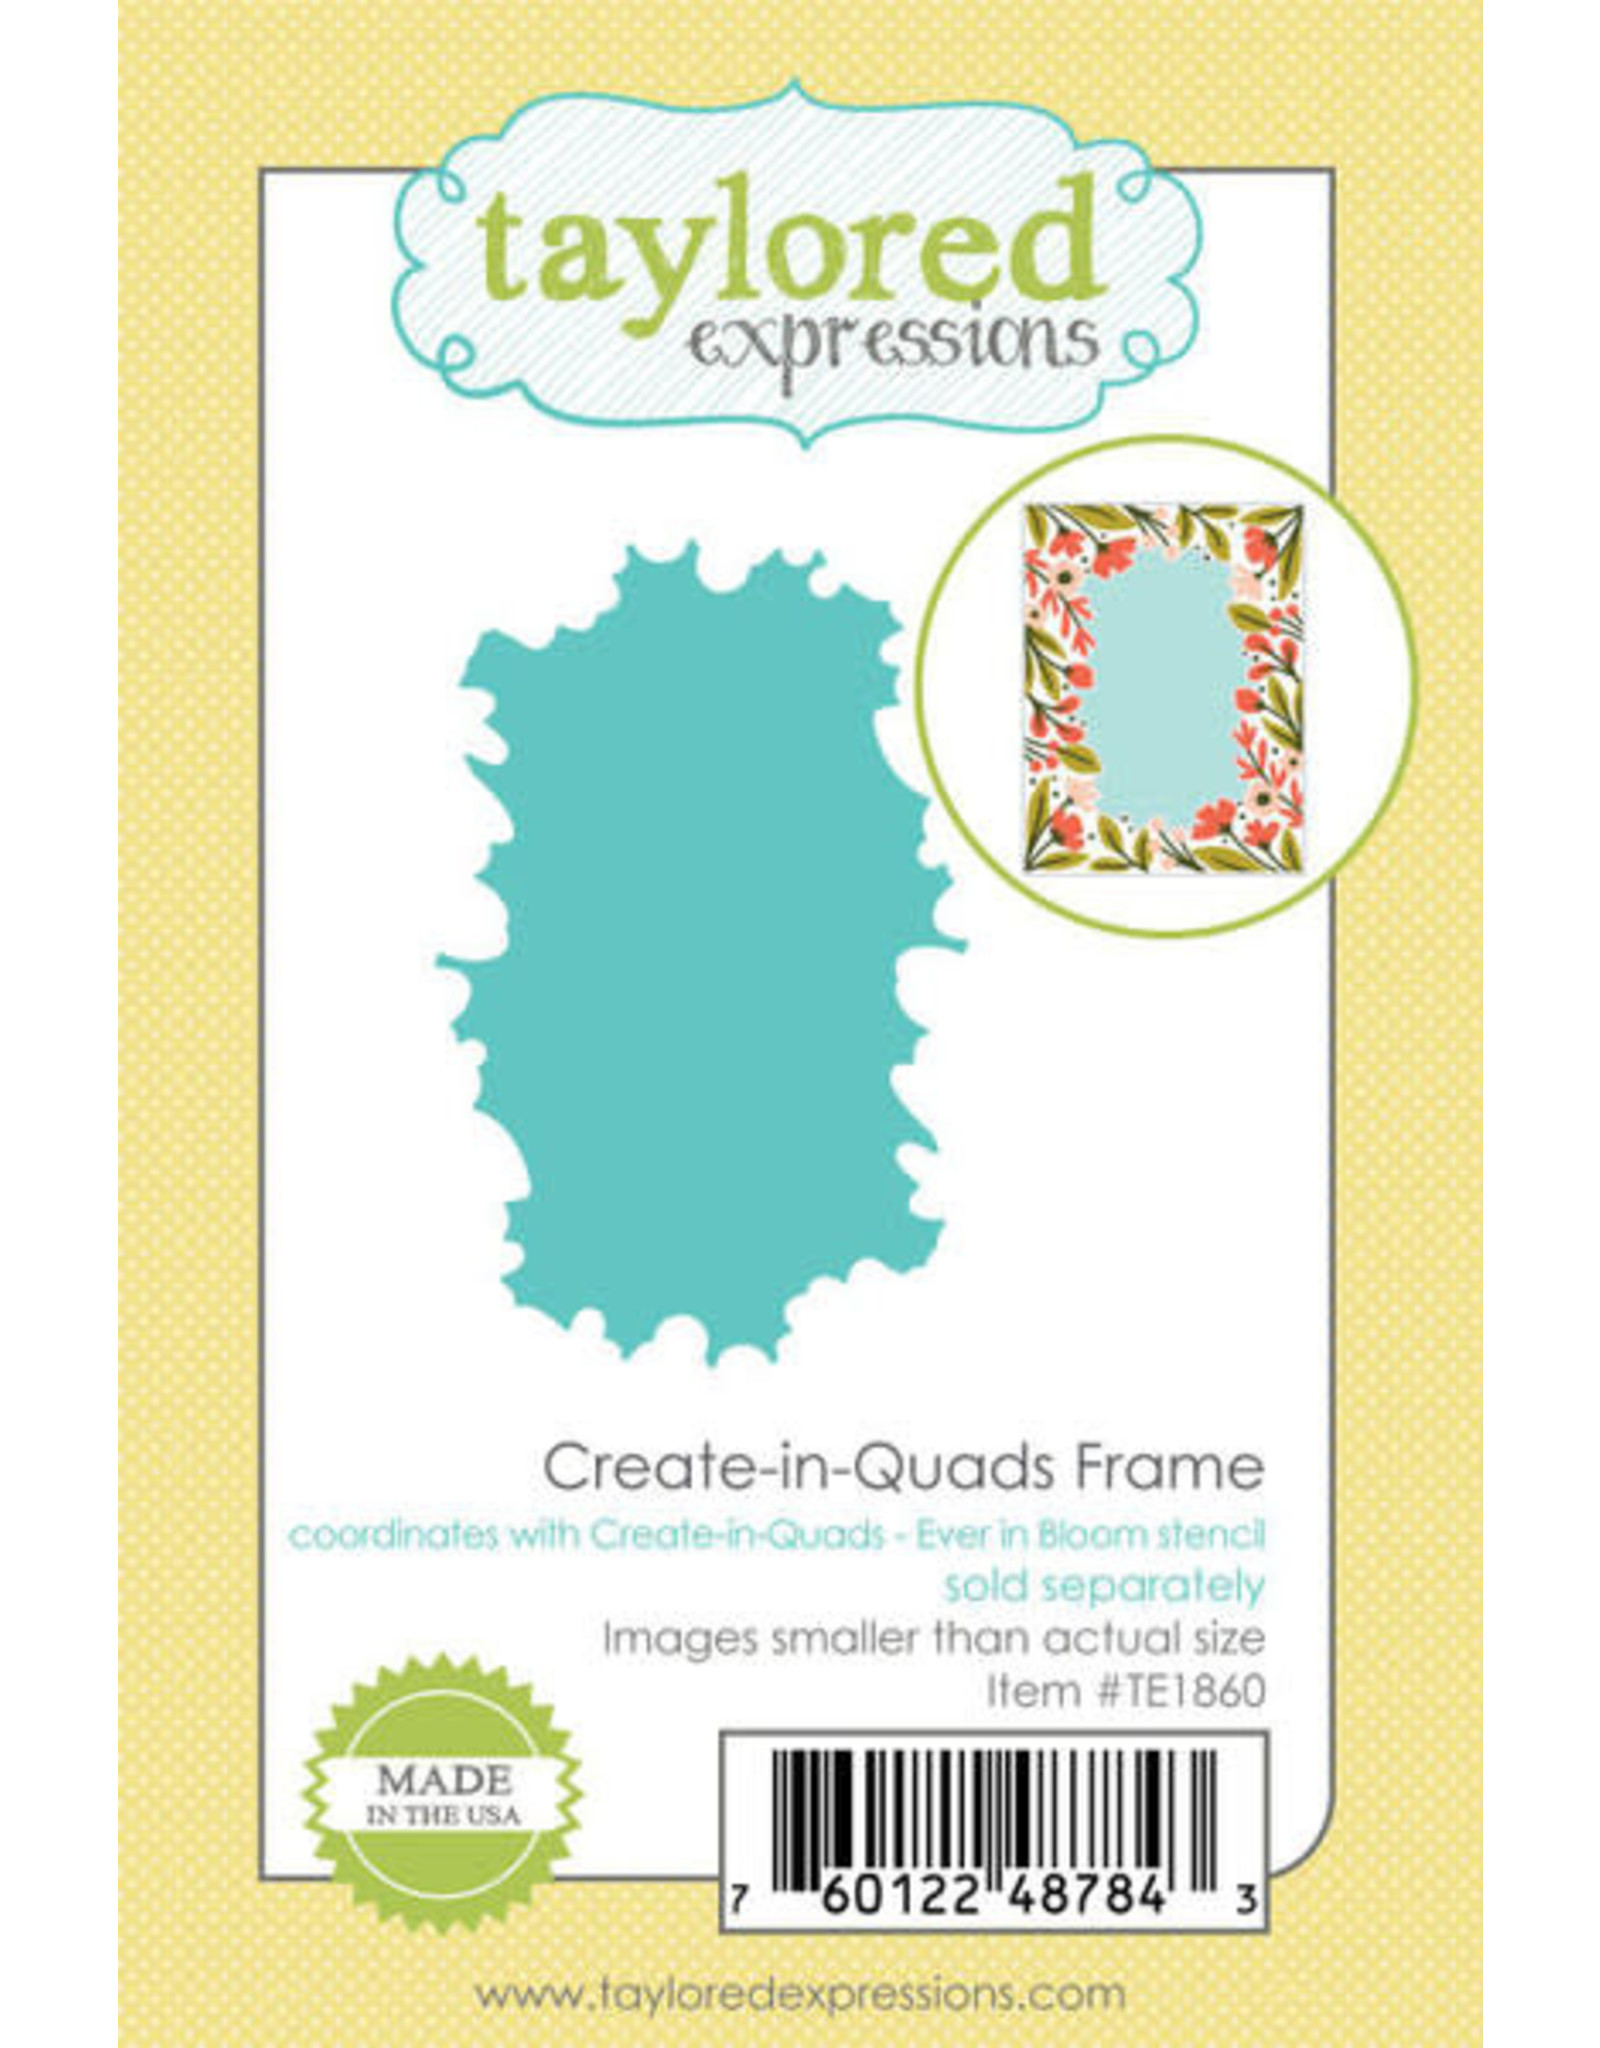 Taylored Expressions Create-in-Quads - Ever in Bloom Frame